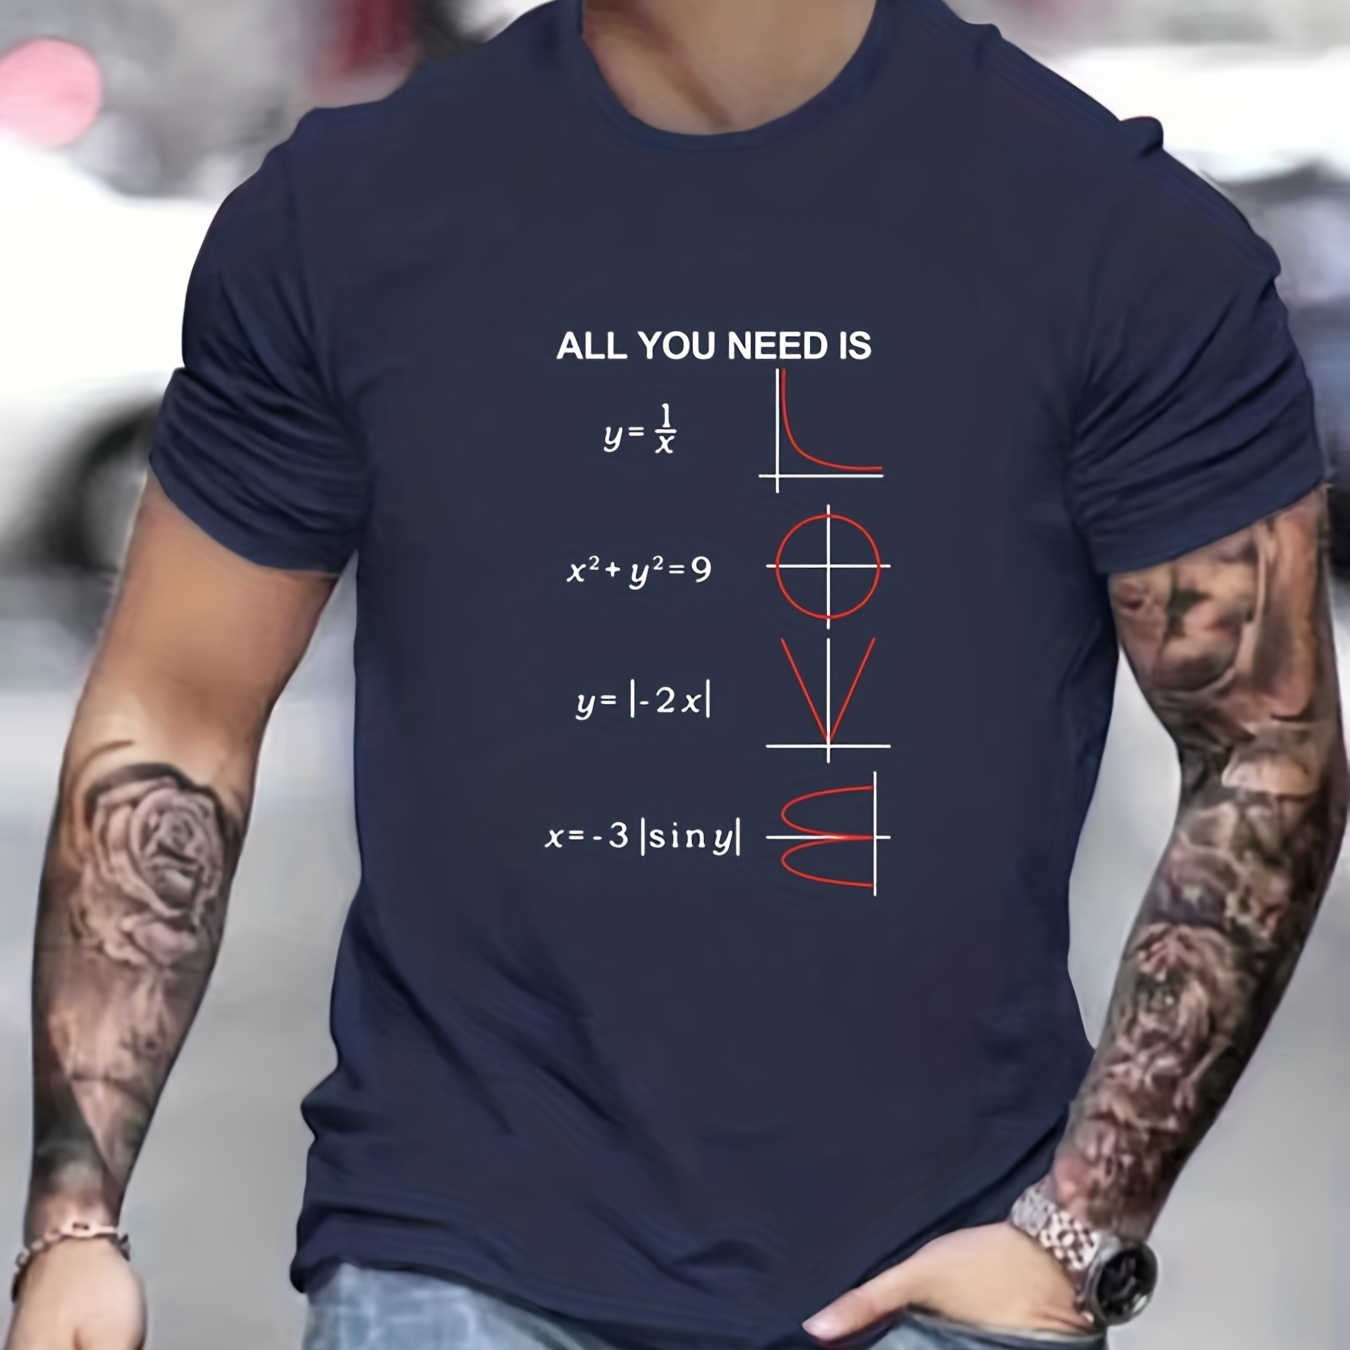 

all You Need Is Love" Pattern Print Men's Comfy T-shirt, Graphic Tee Men's Summer Outdoor Clothes, Men's Clothing, Tops For Men